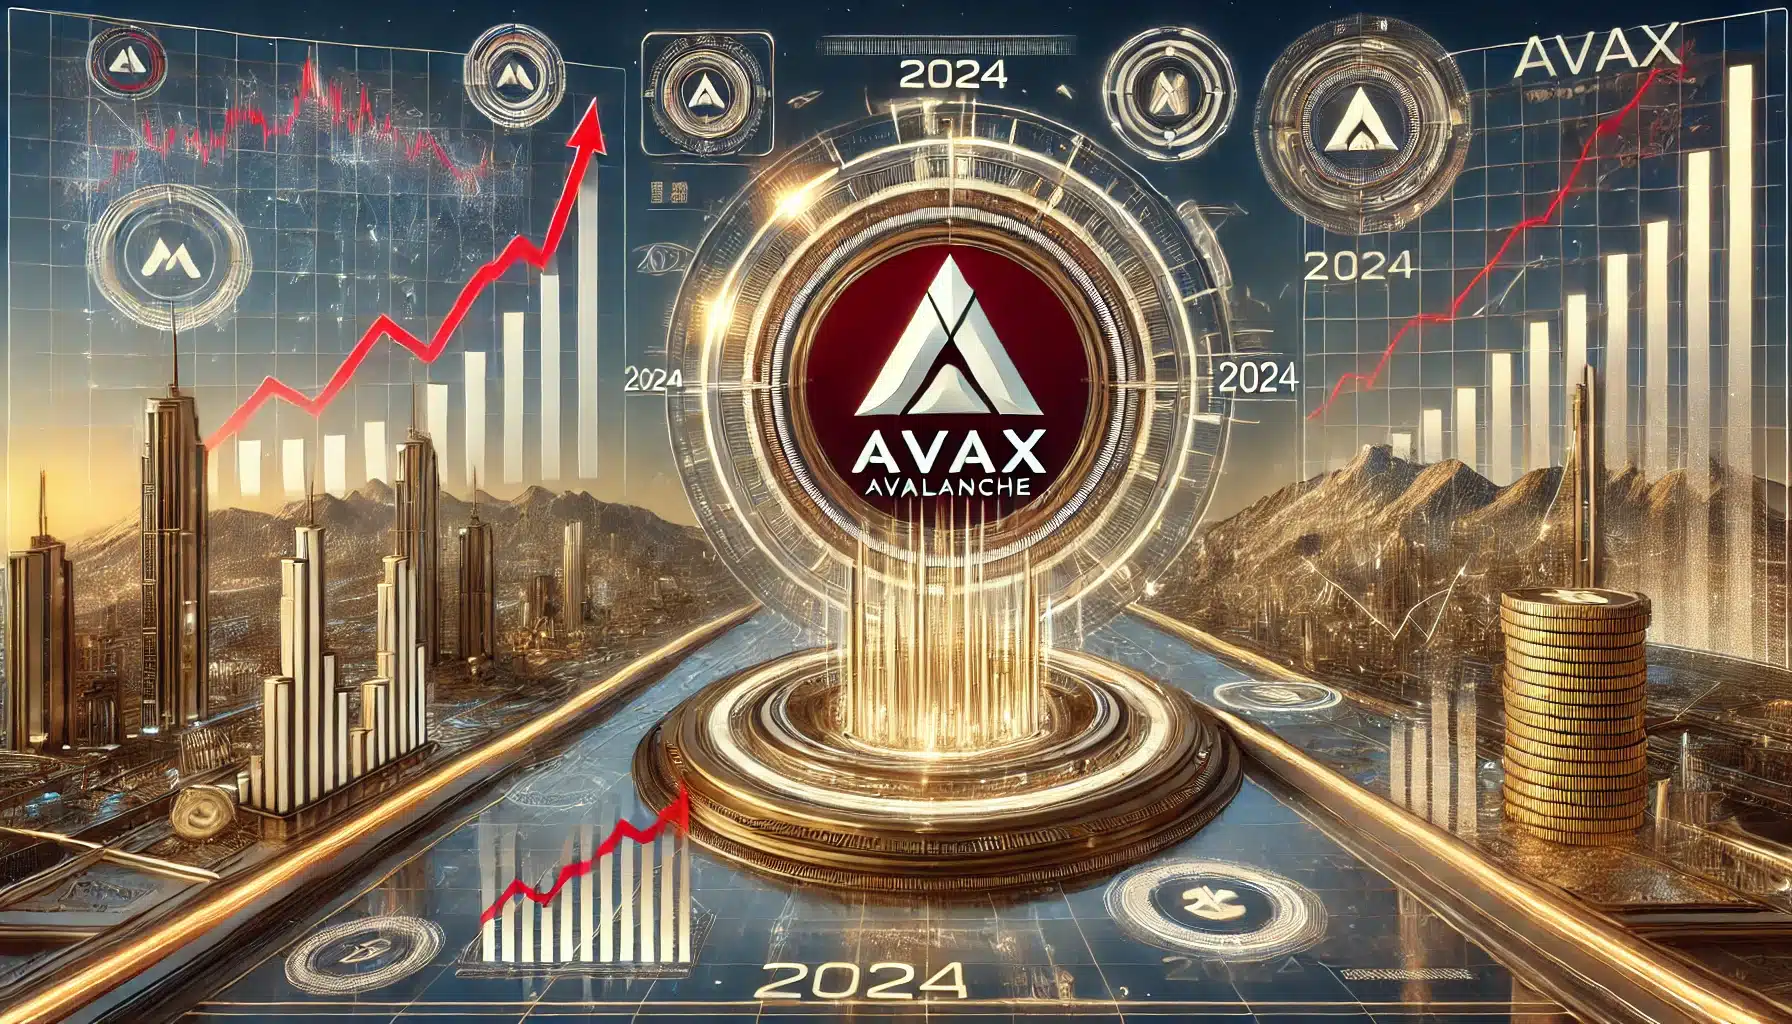 Futuristic digital illustration showing the AVAX (Avalanche) logo surrounded by rising charts, financial symbols, and digital assets. The background features a high-tech cityscape with holographic elements and a digital market board displaying fluctuating values, in shades of red, white, and gold.